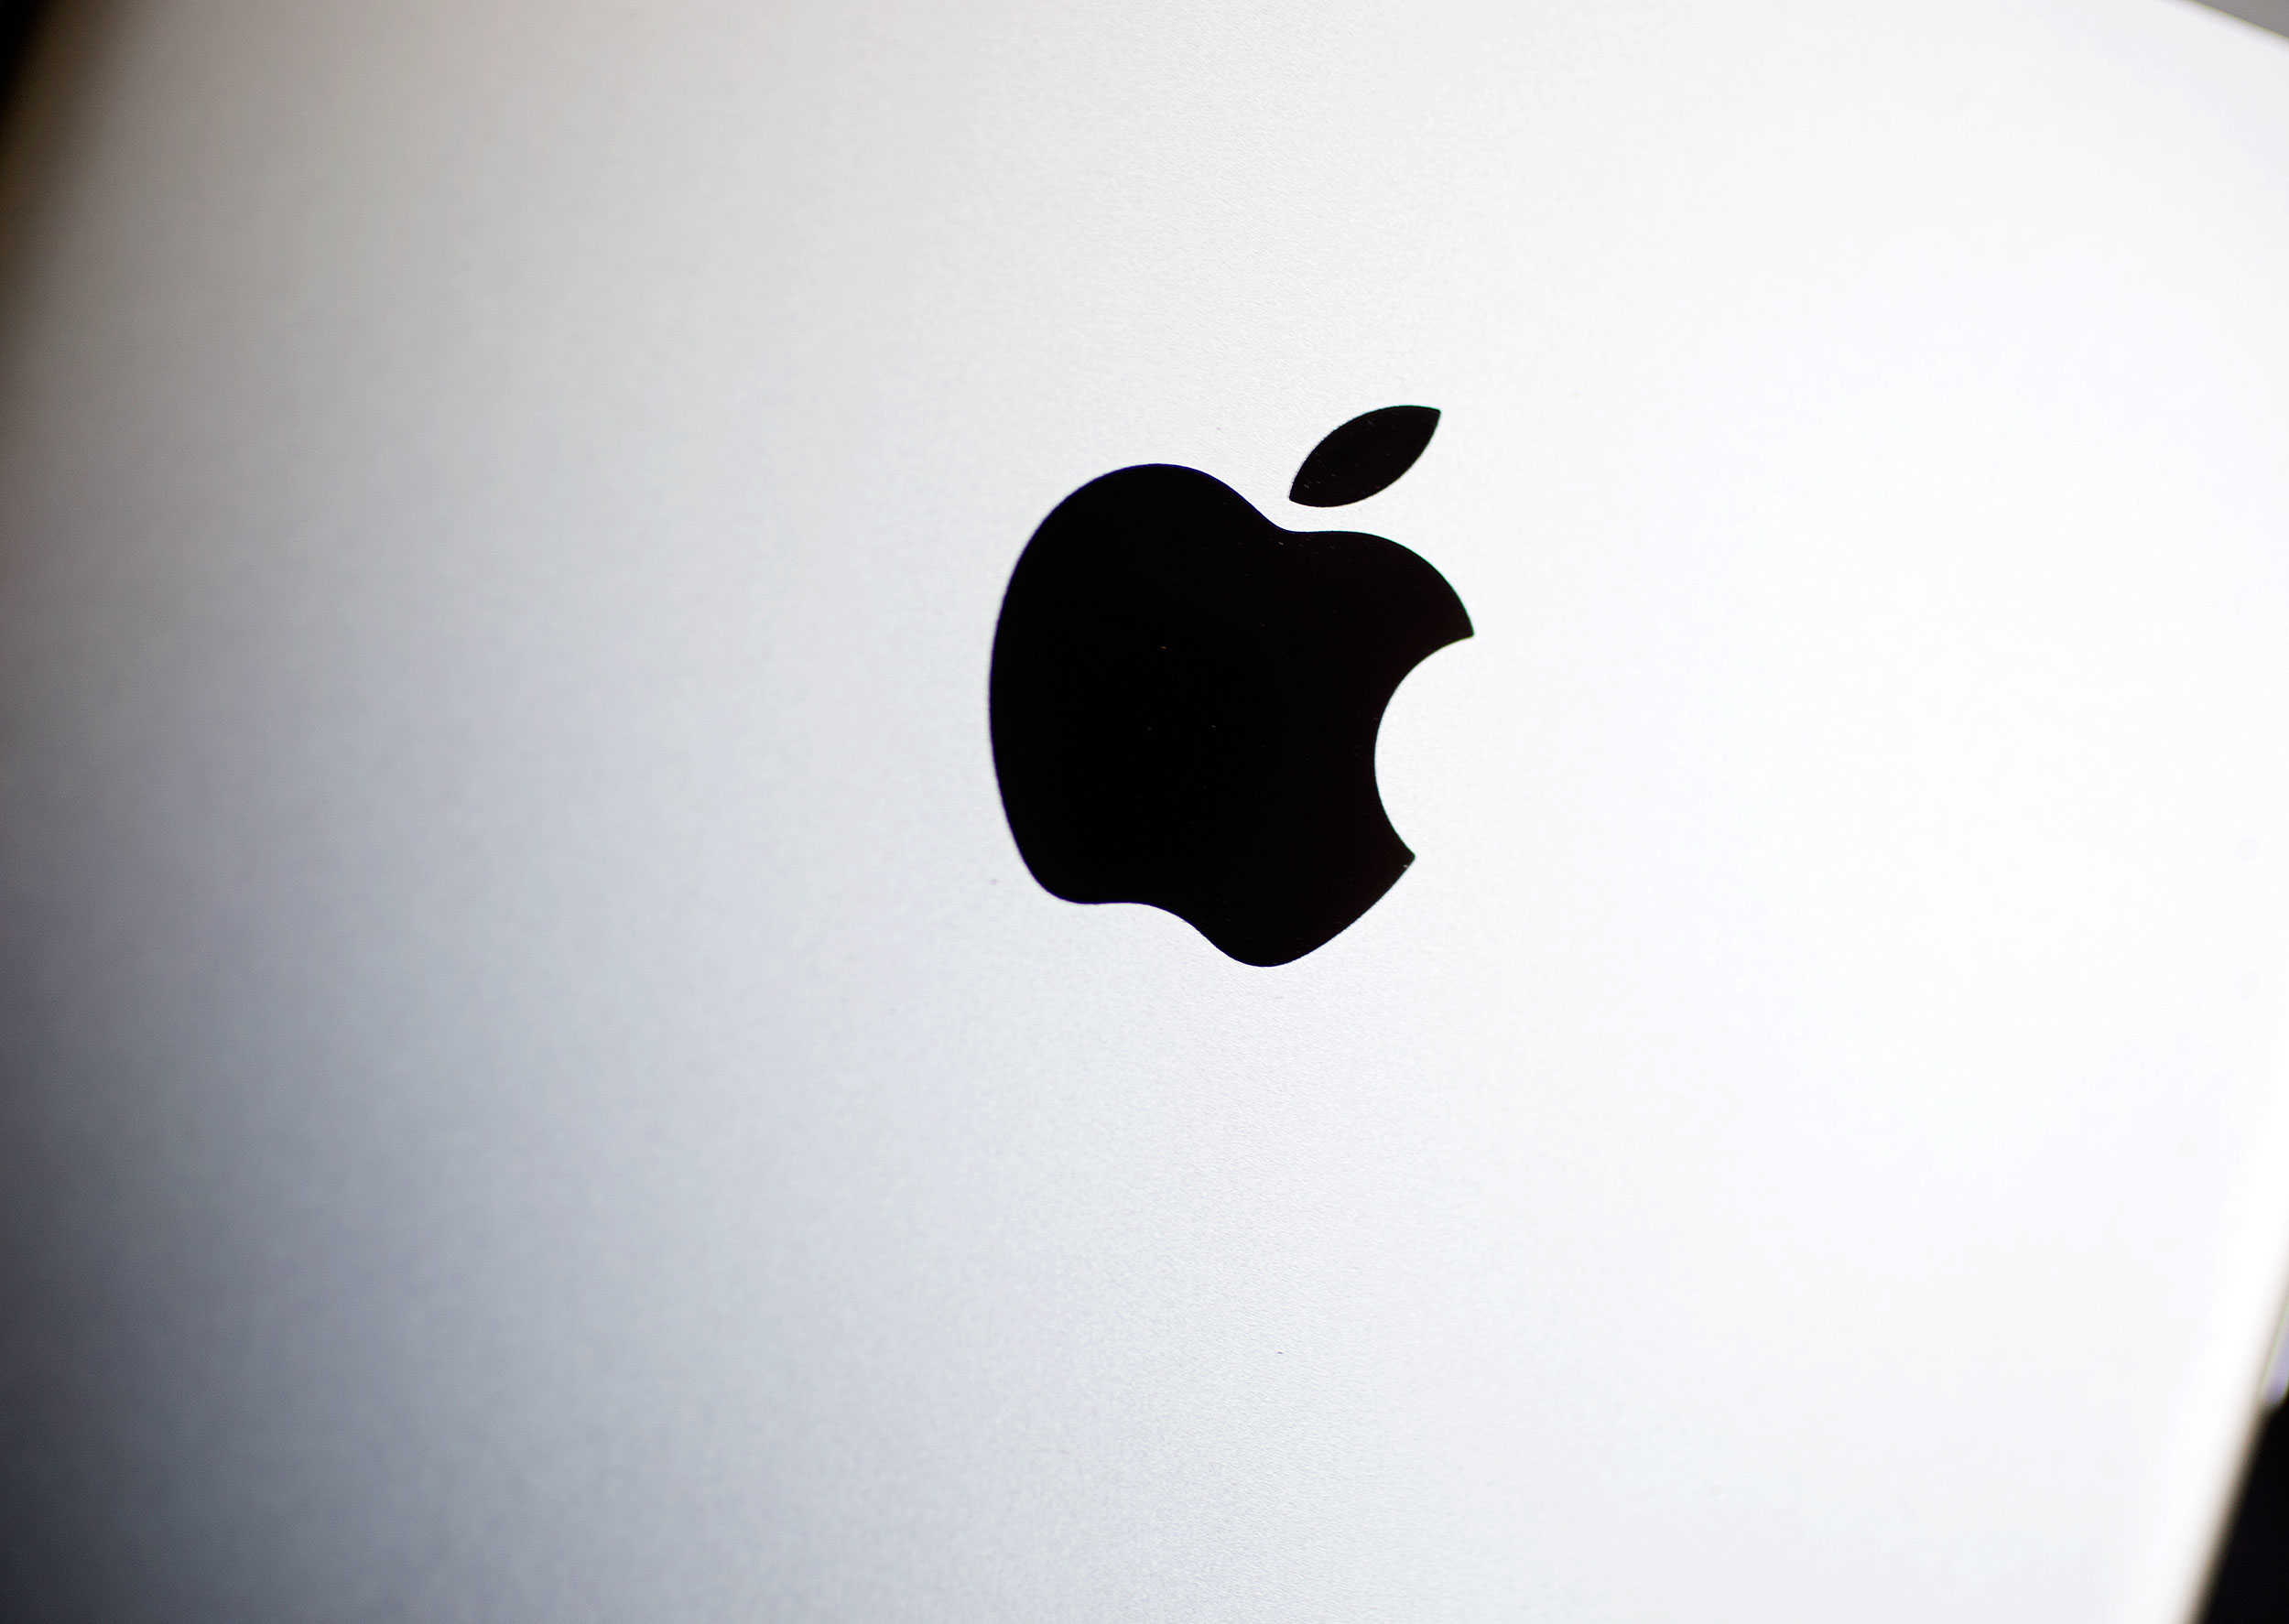 Should Apple cave when it comes to encryption?